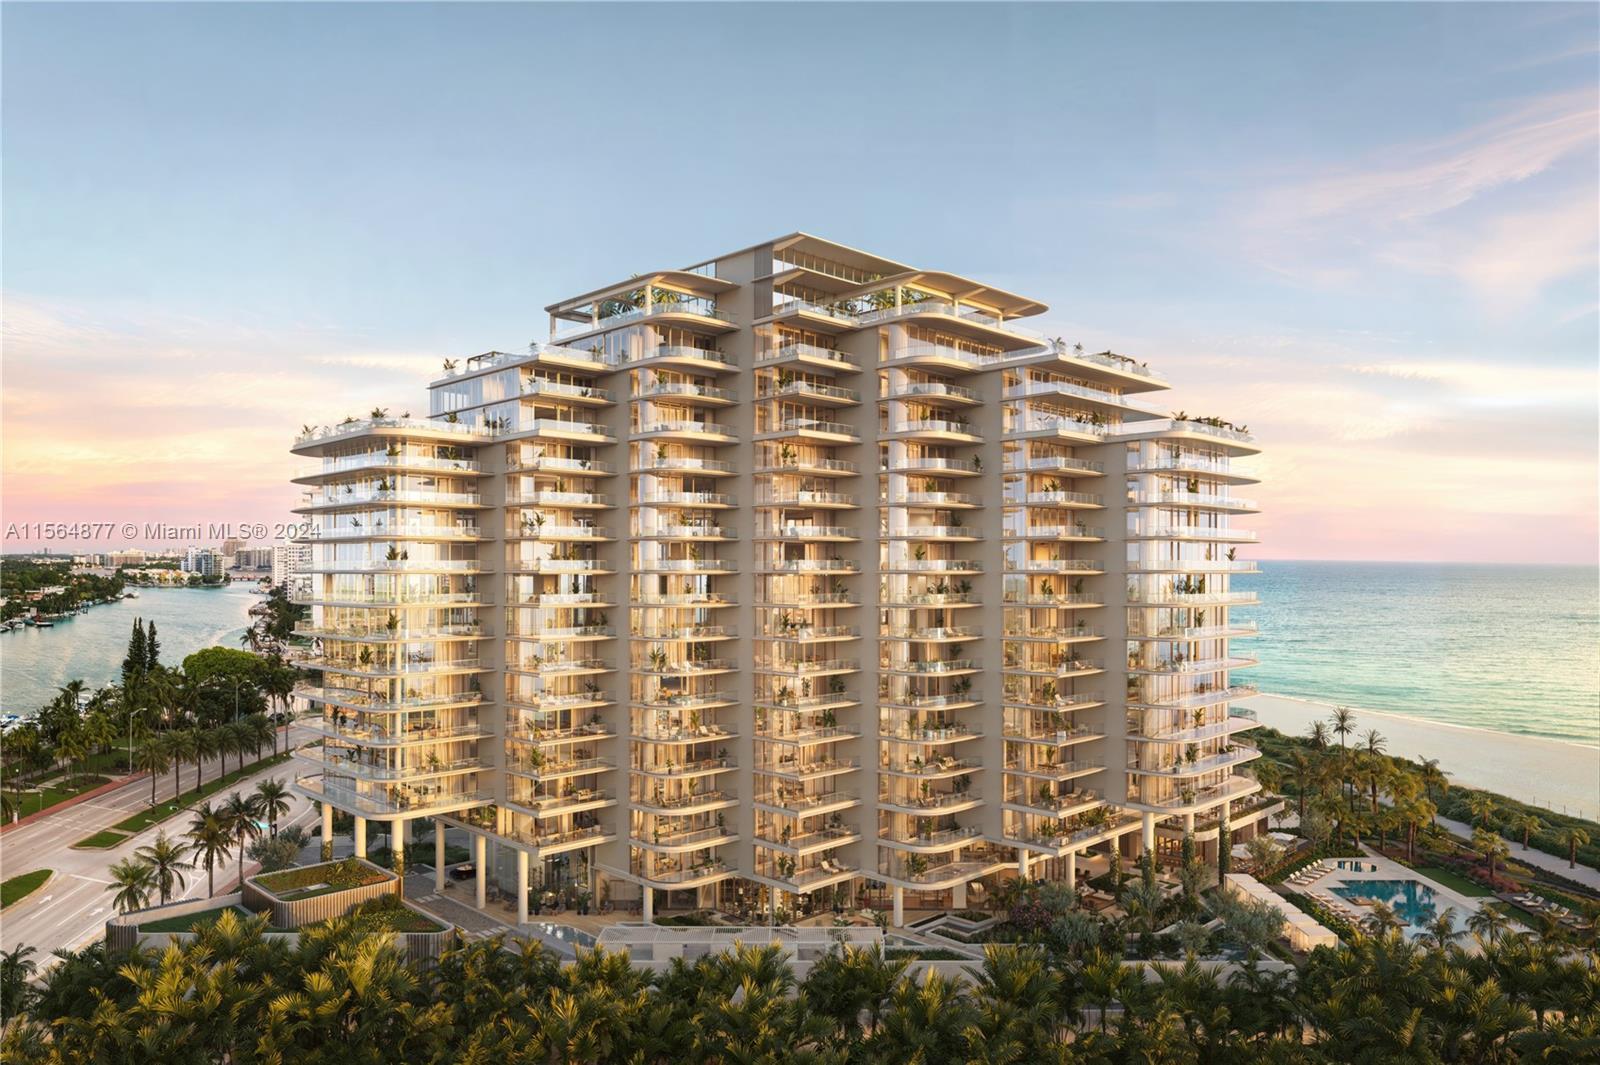 Rising from the most peaceful and expansive stretch of sand on Miami Beach’s coastline, The Perigon 